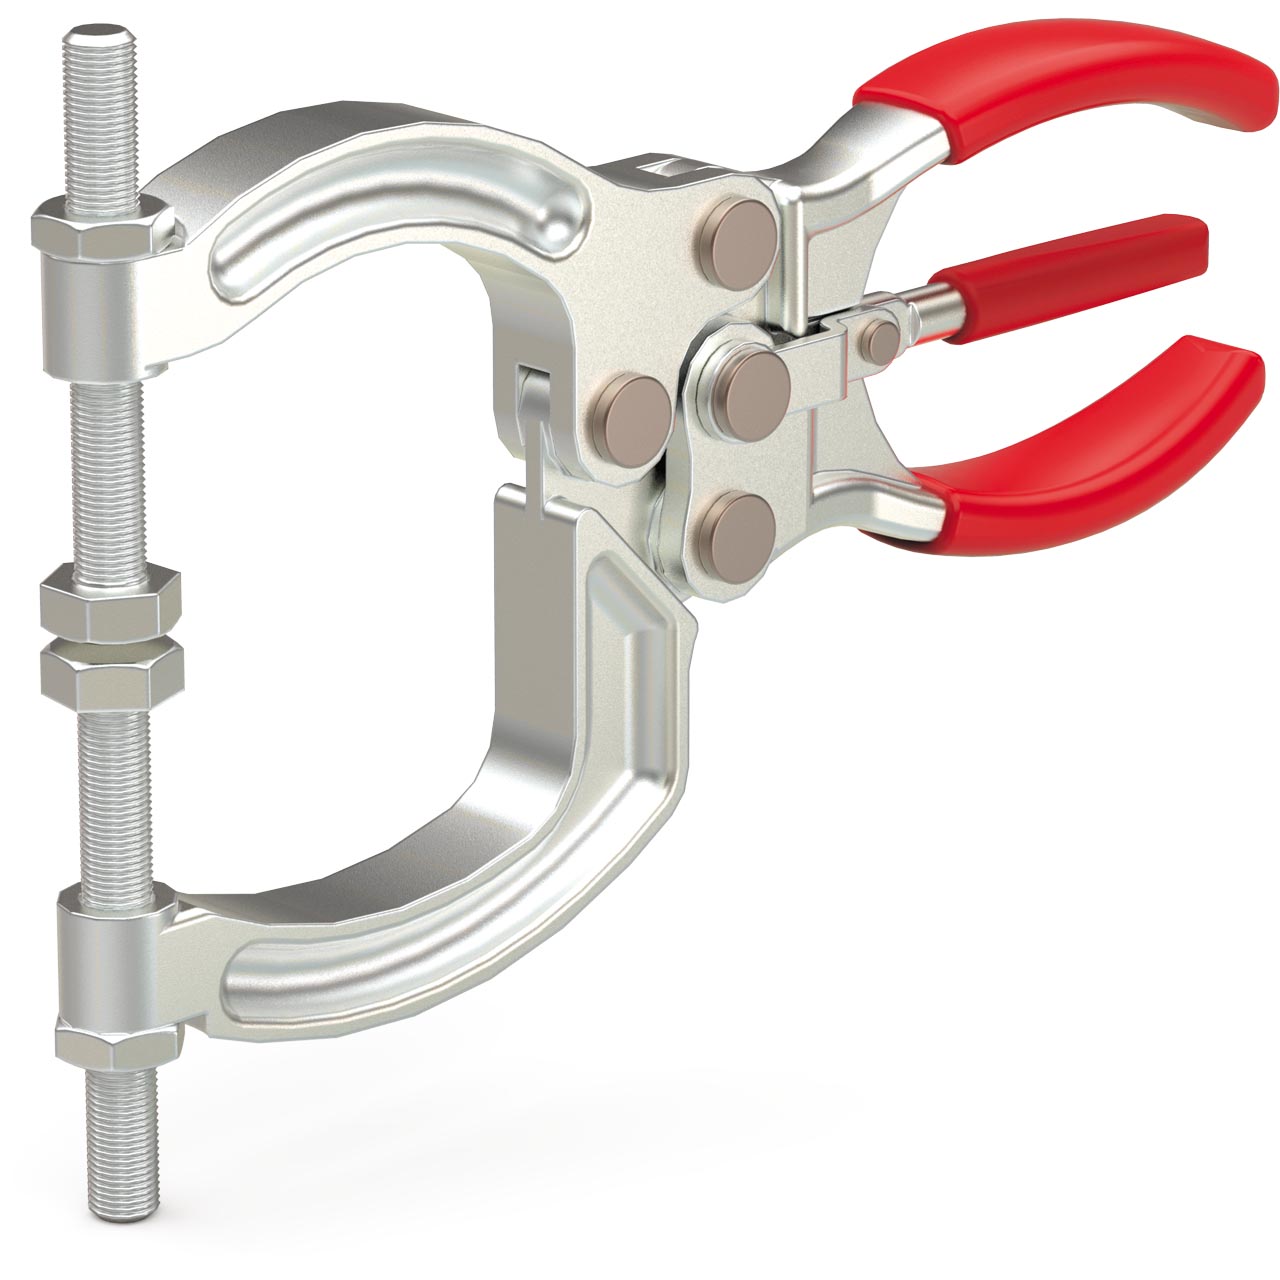 De-Sta-Co Clamp #424 Squeeze Action Clamp 